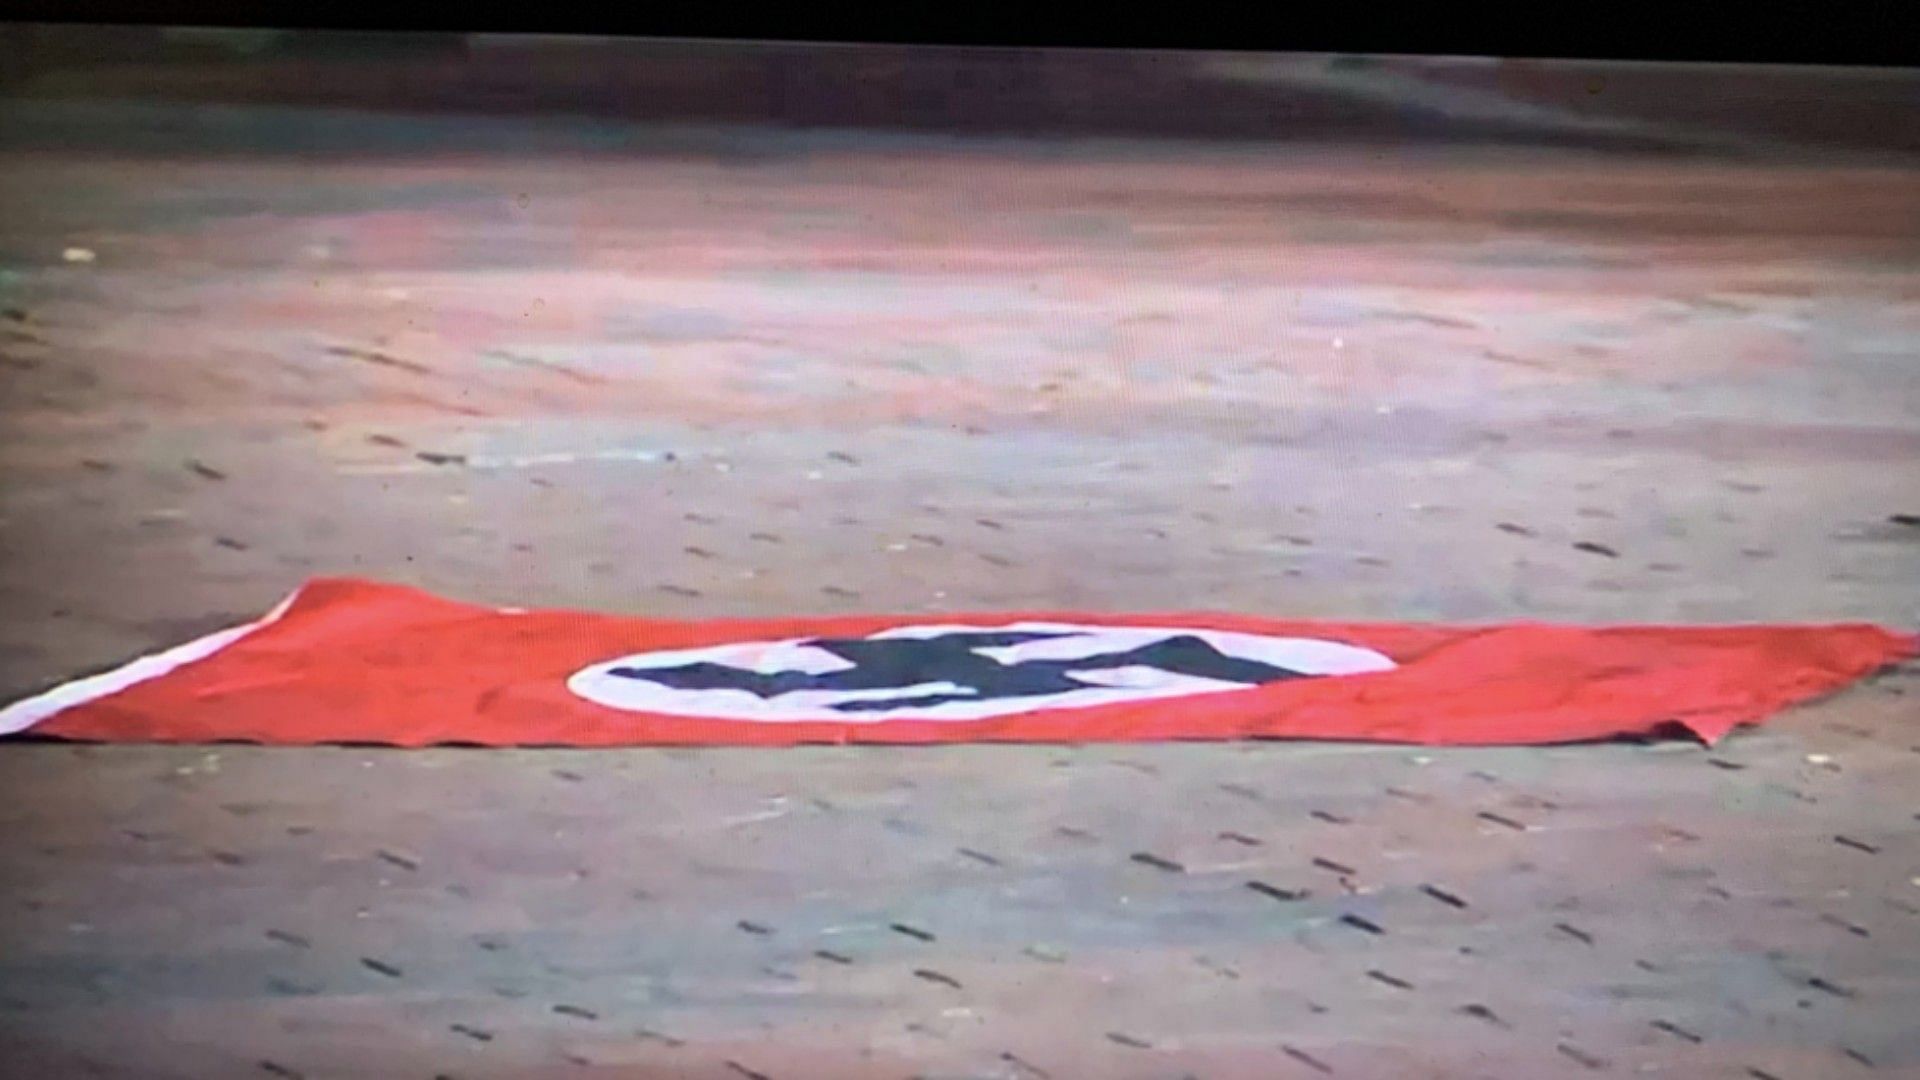 The Nazi flag waved by the suspect pictured on the ground (Image via Melanie Alnwick/Twitter)